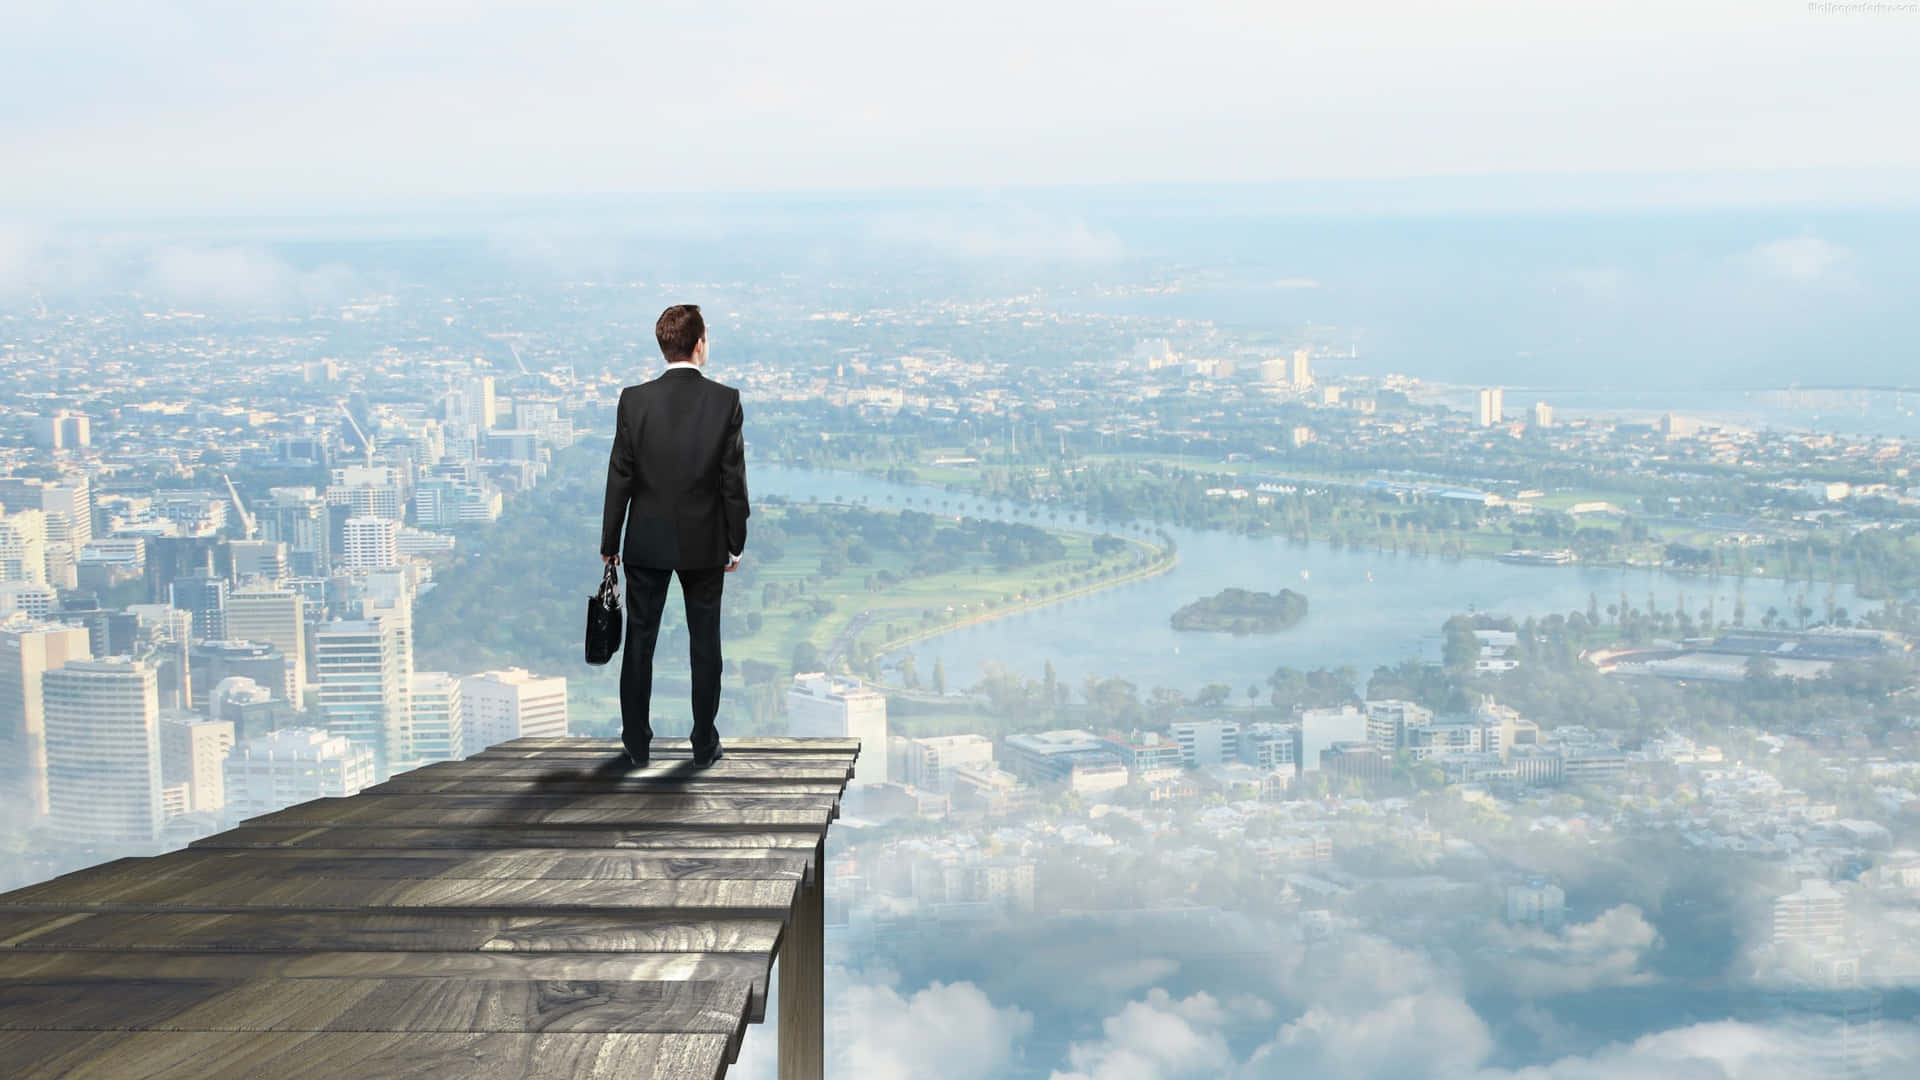 A Man Standing On A Ledge Overlooking A City